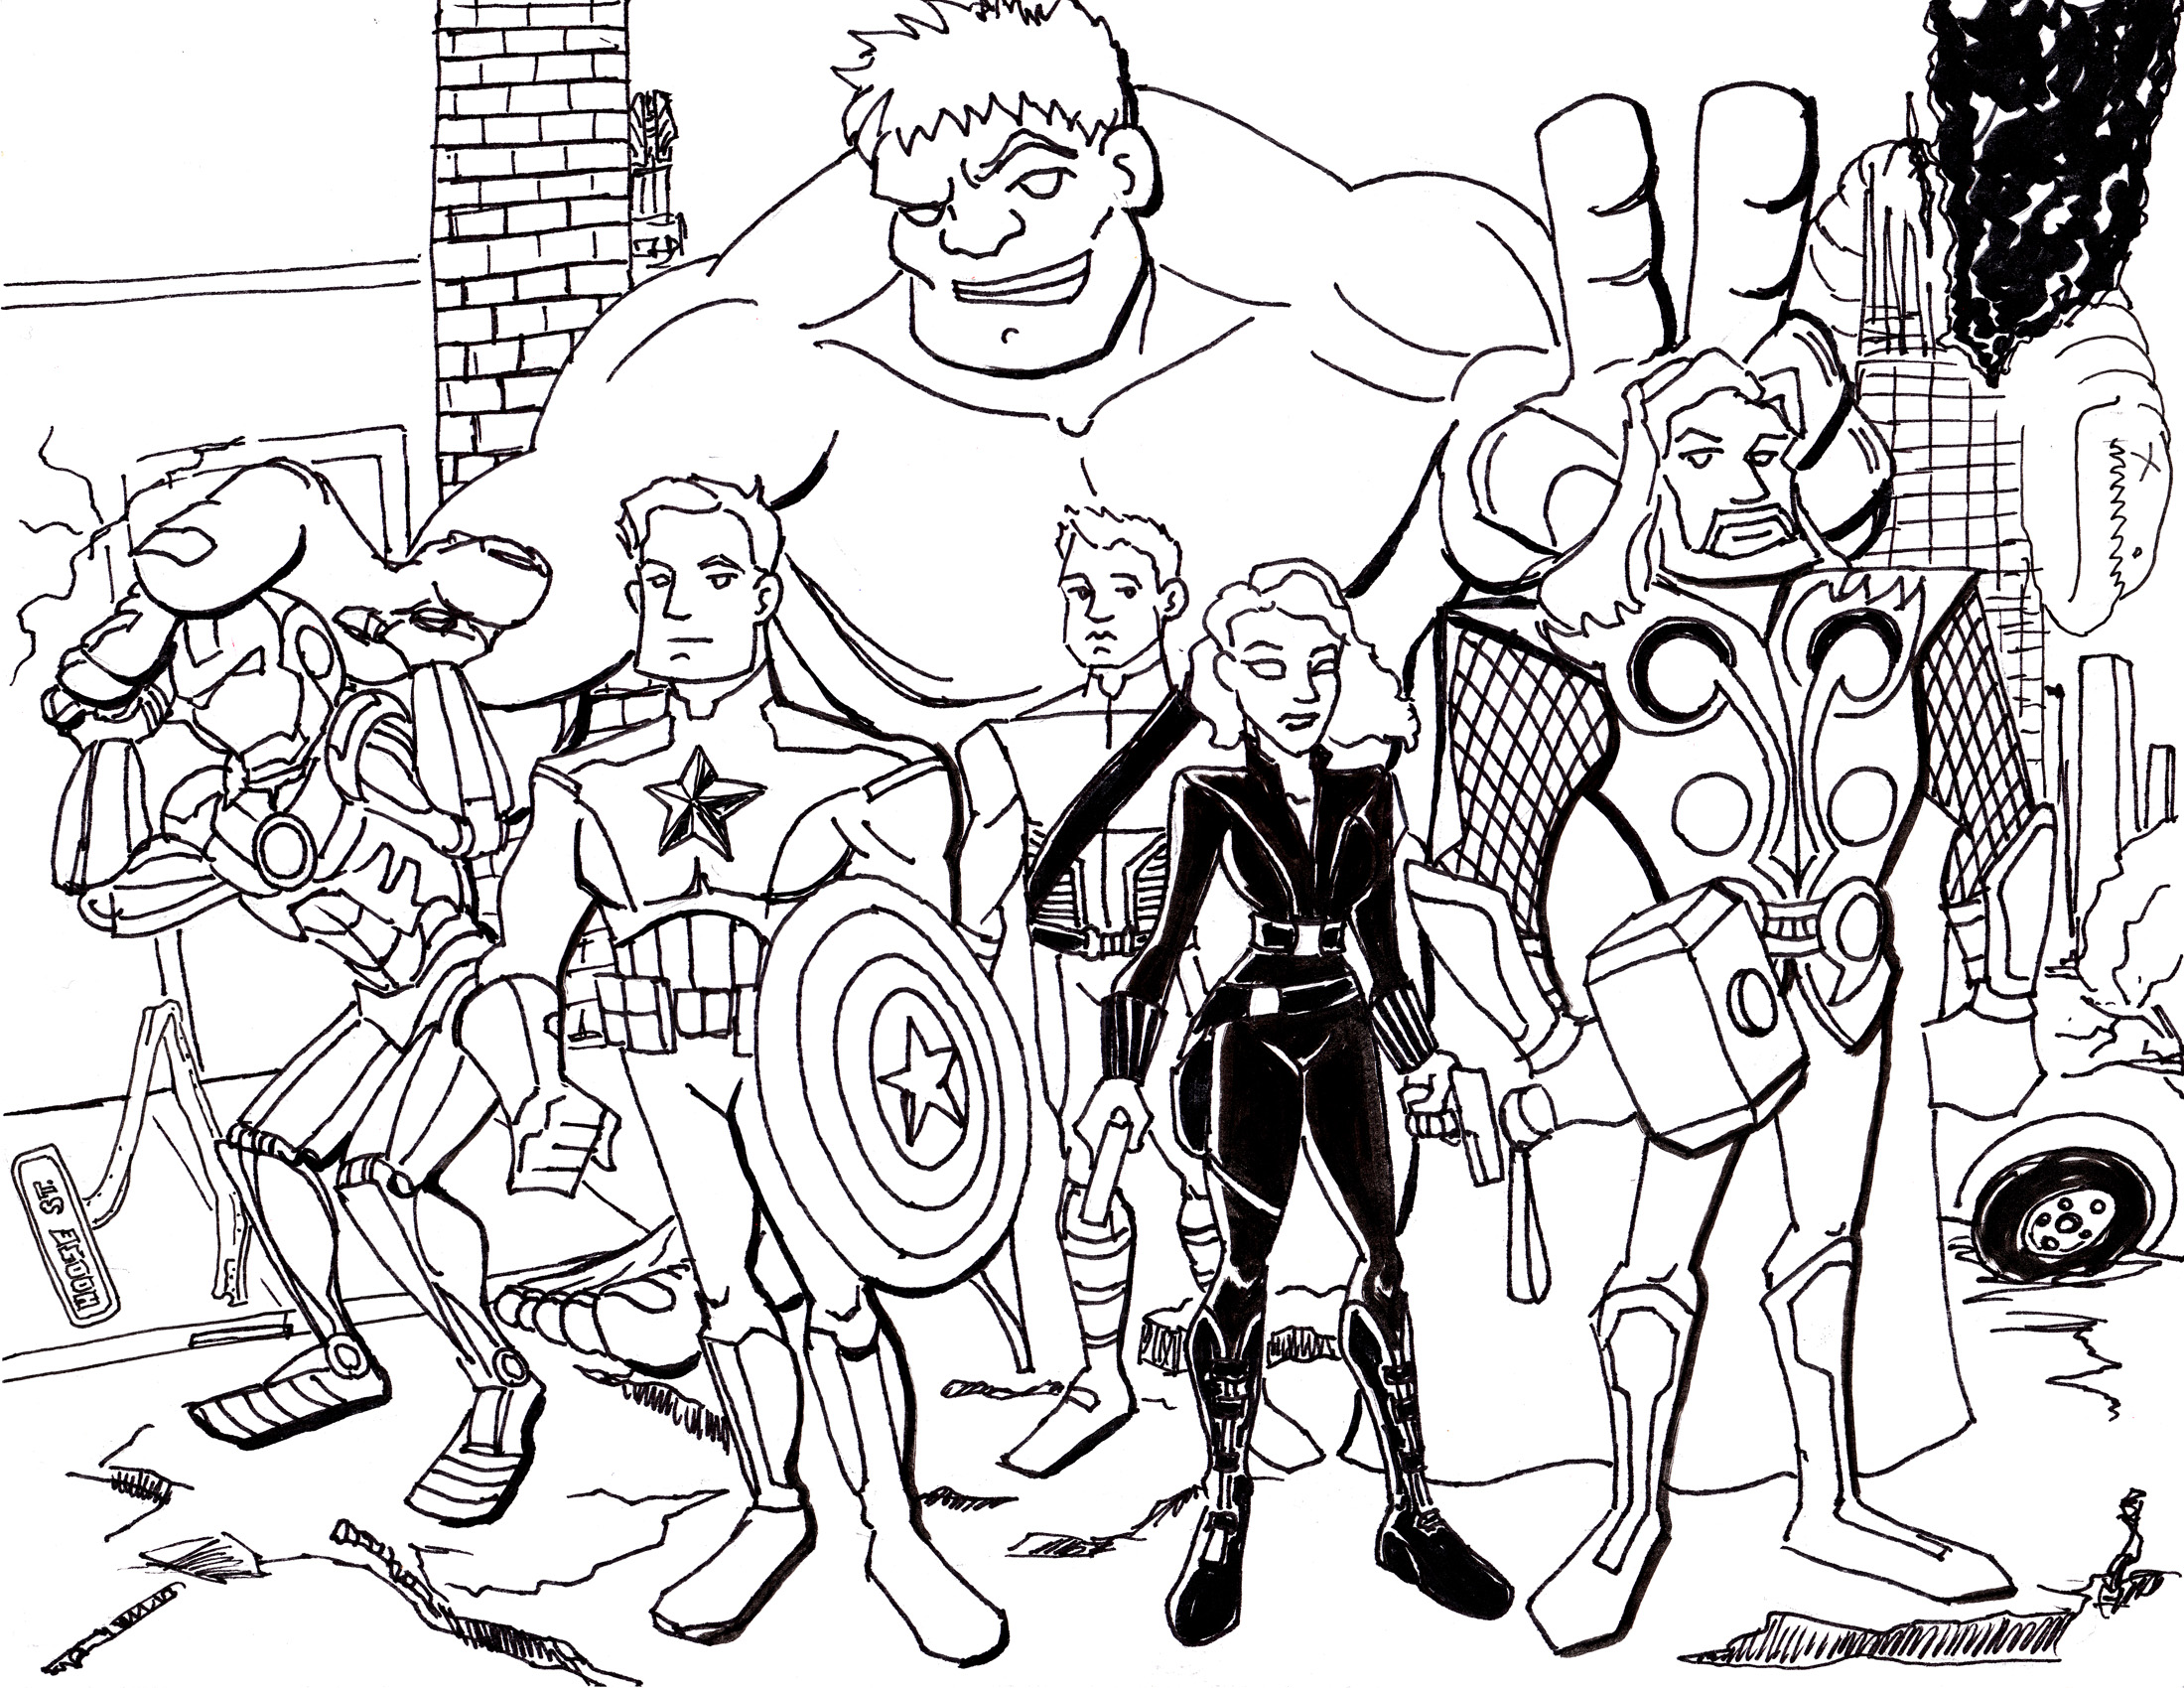 Get This Avengers Coloring Pages Superheroes for Boys 56729 !